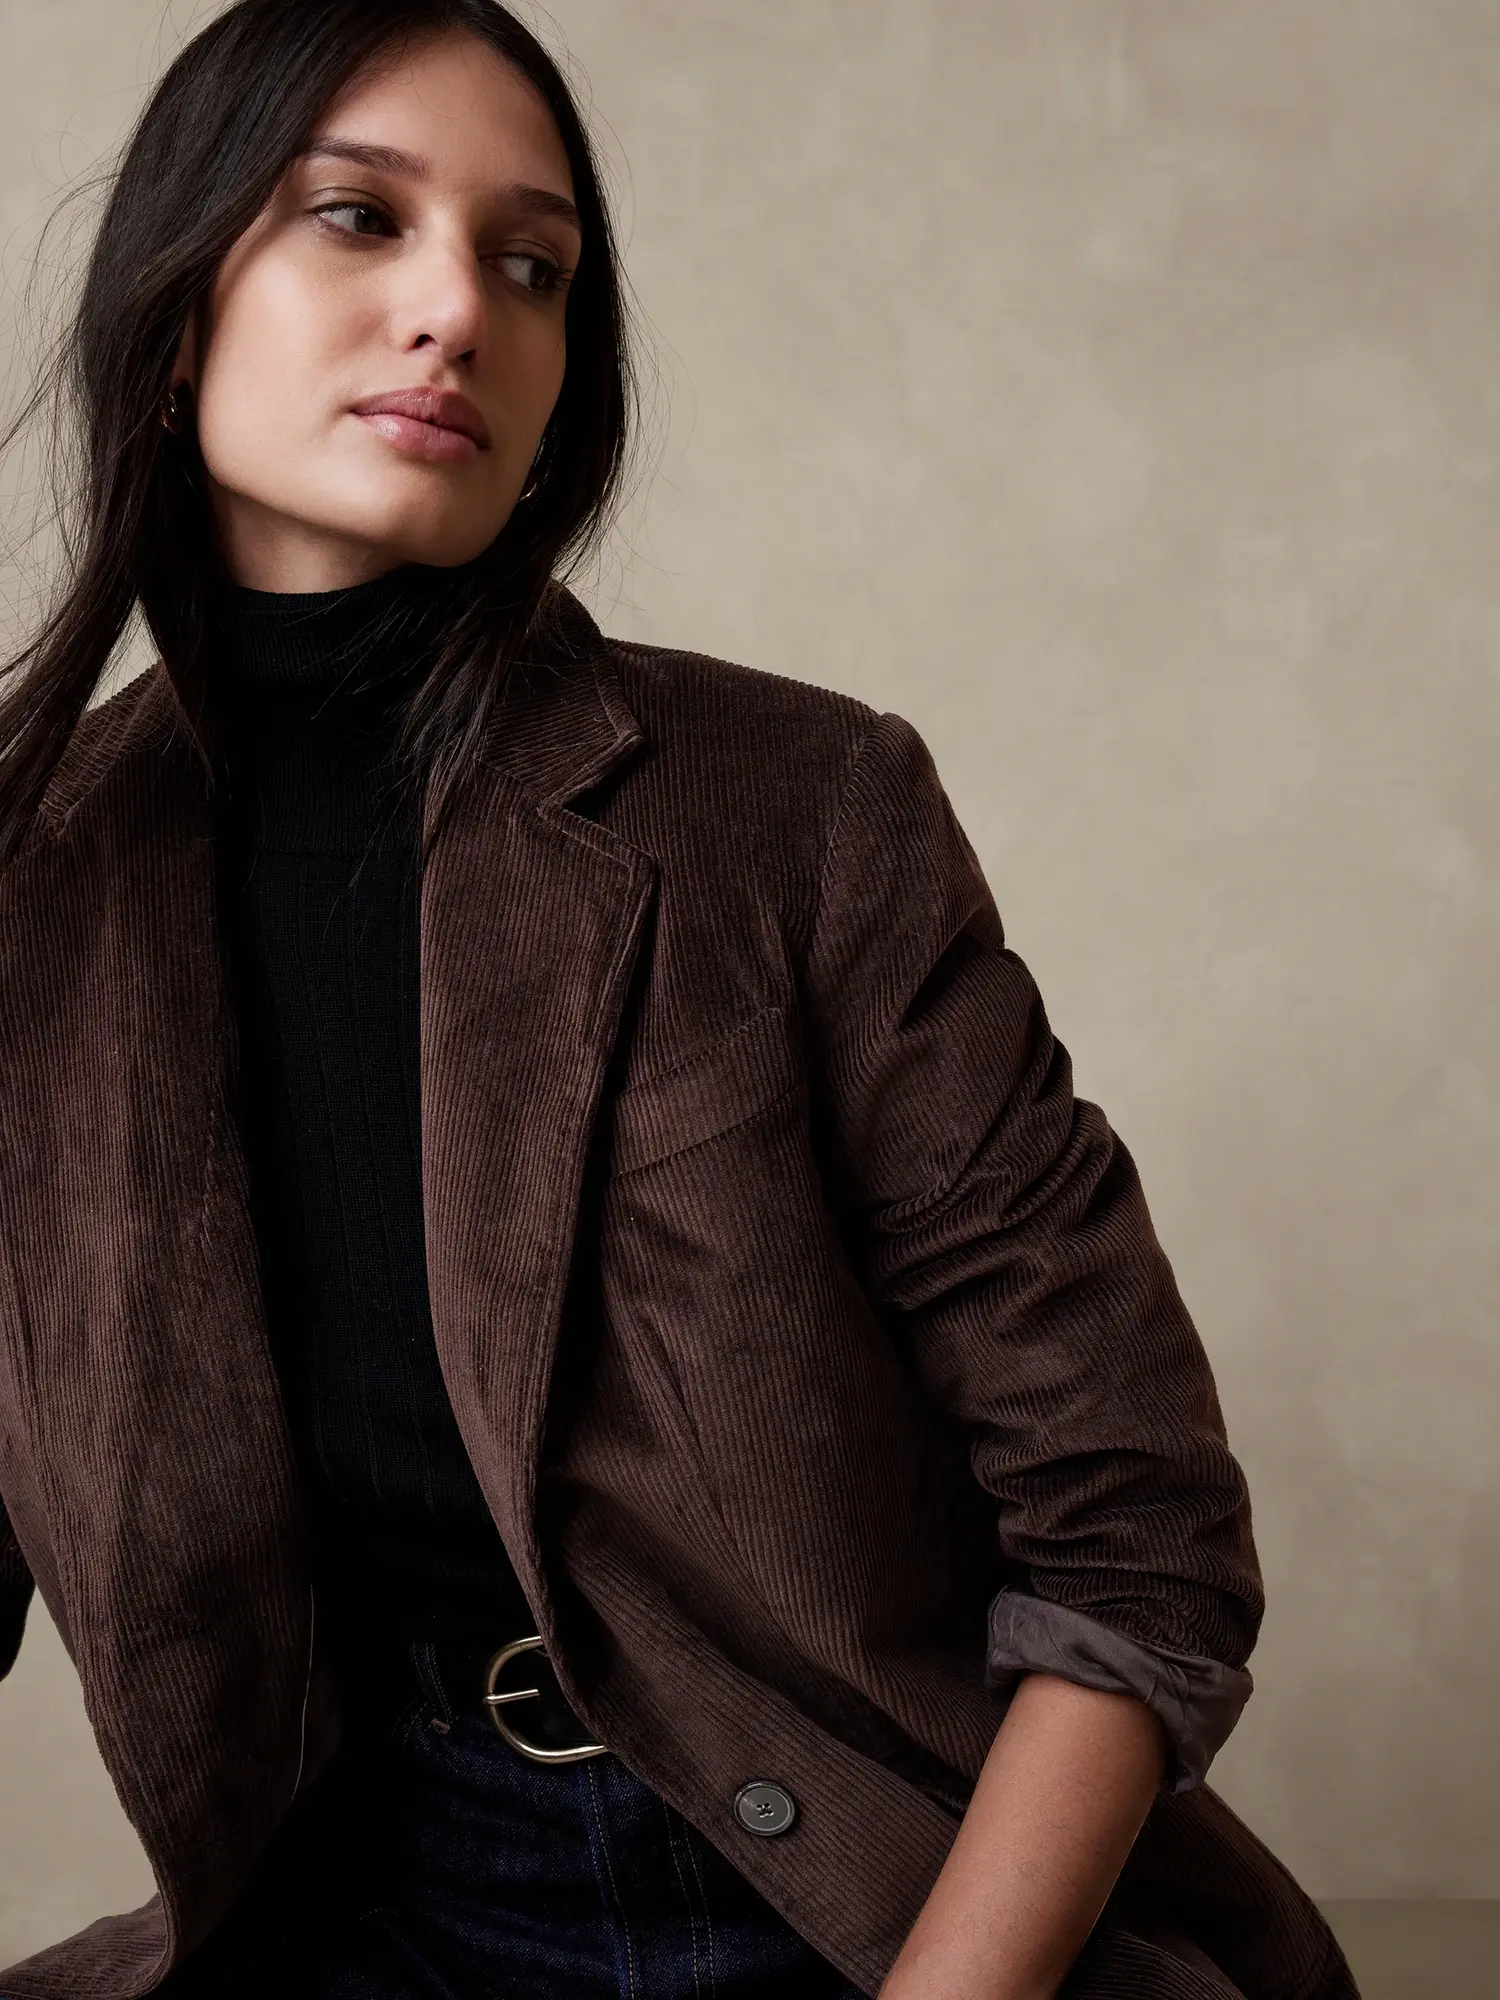 Banana Republic Has You Work and Occasions Ready for the Fall Season